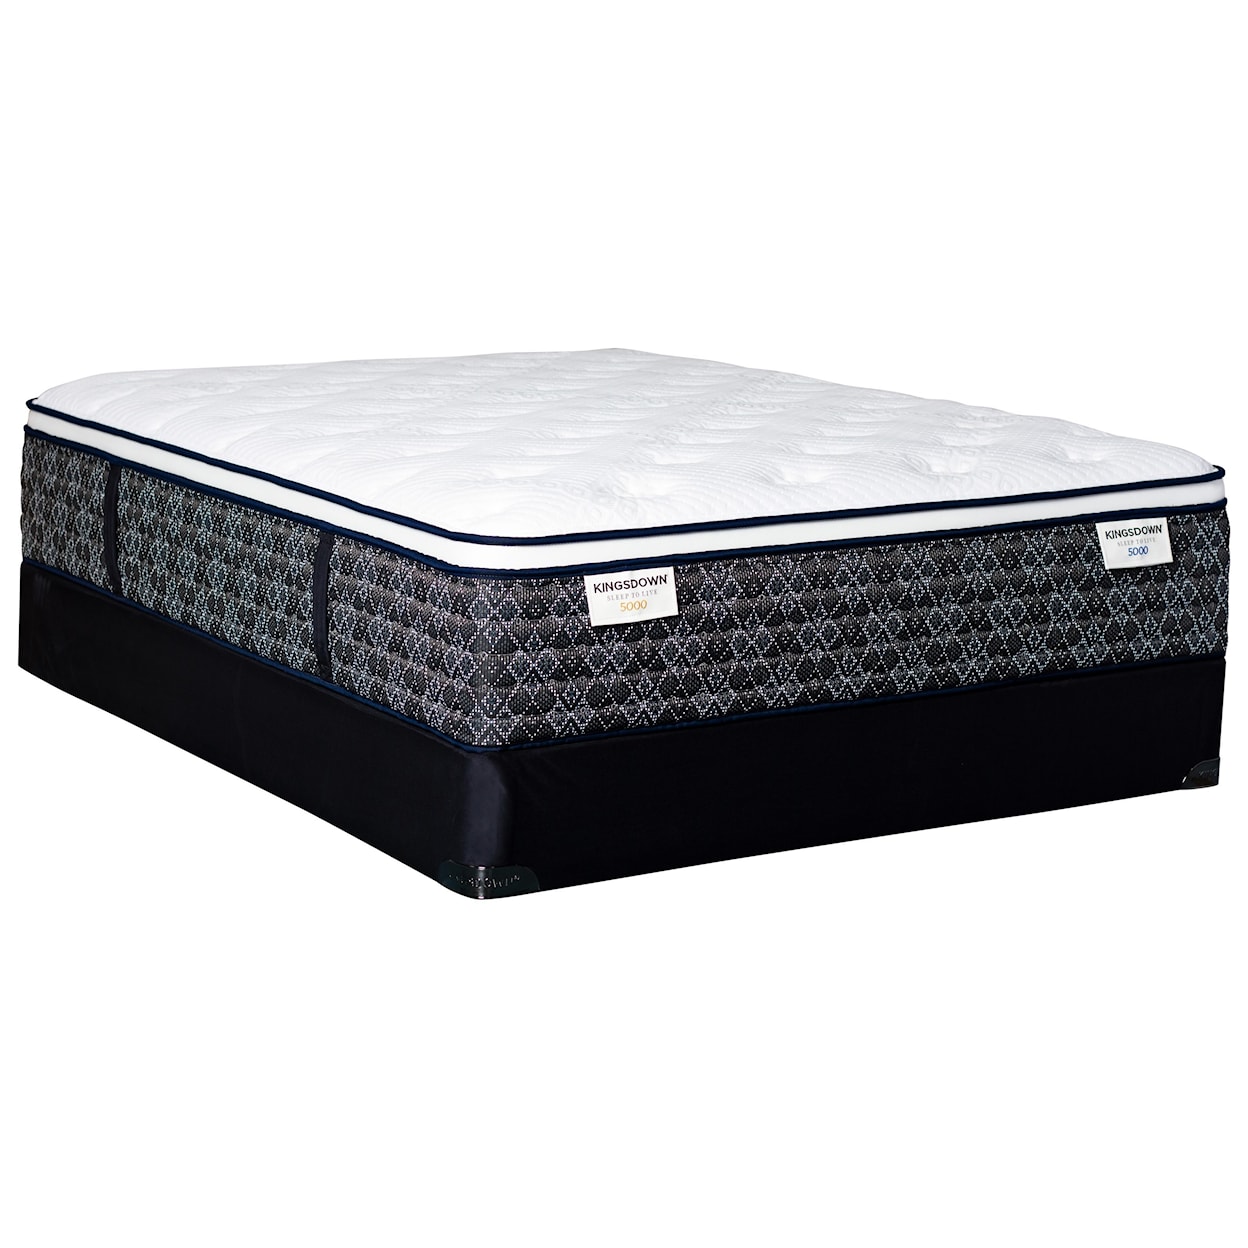 Kingsdown Sleep to Live 5000 Green Red ET Twin Pocketed Coil Mattress LoPro Set